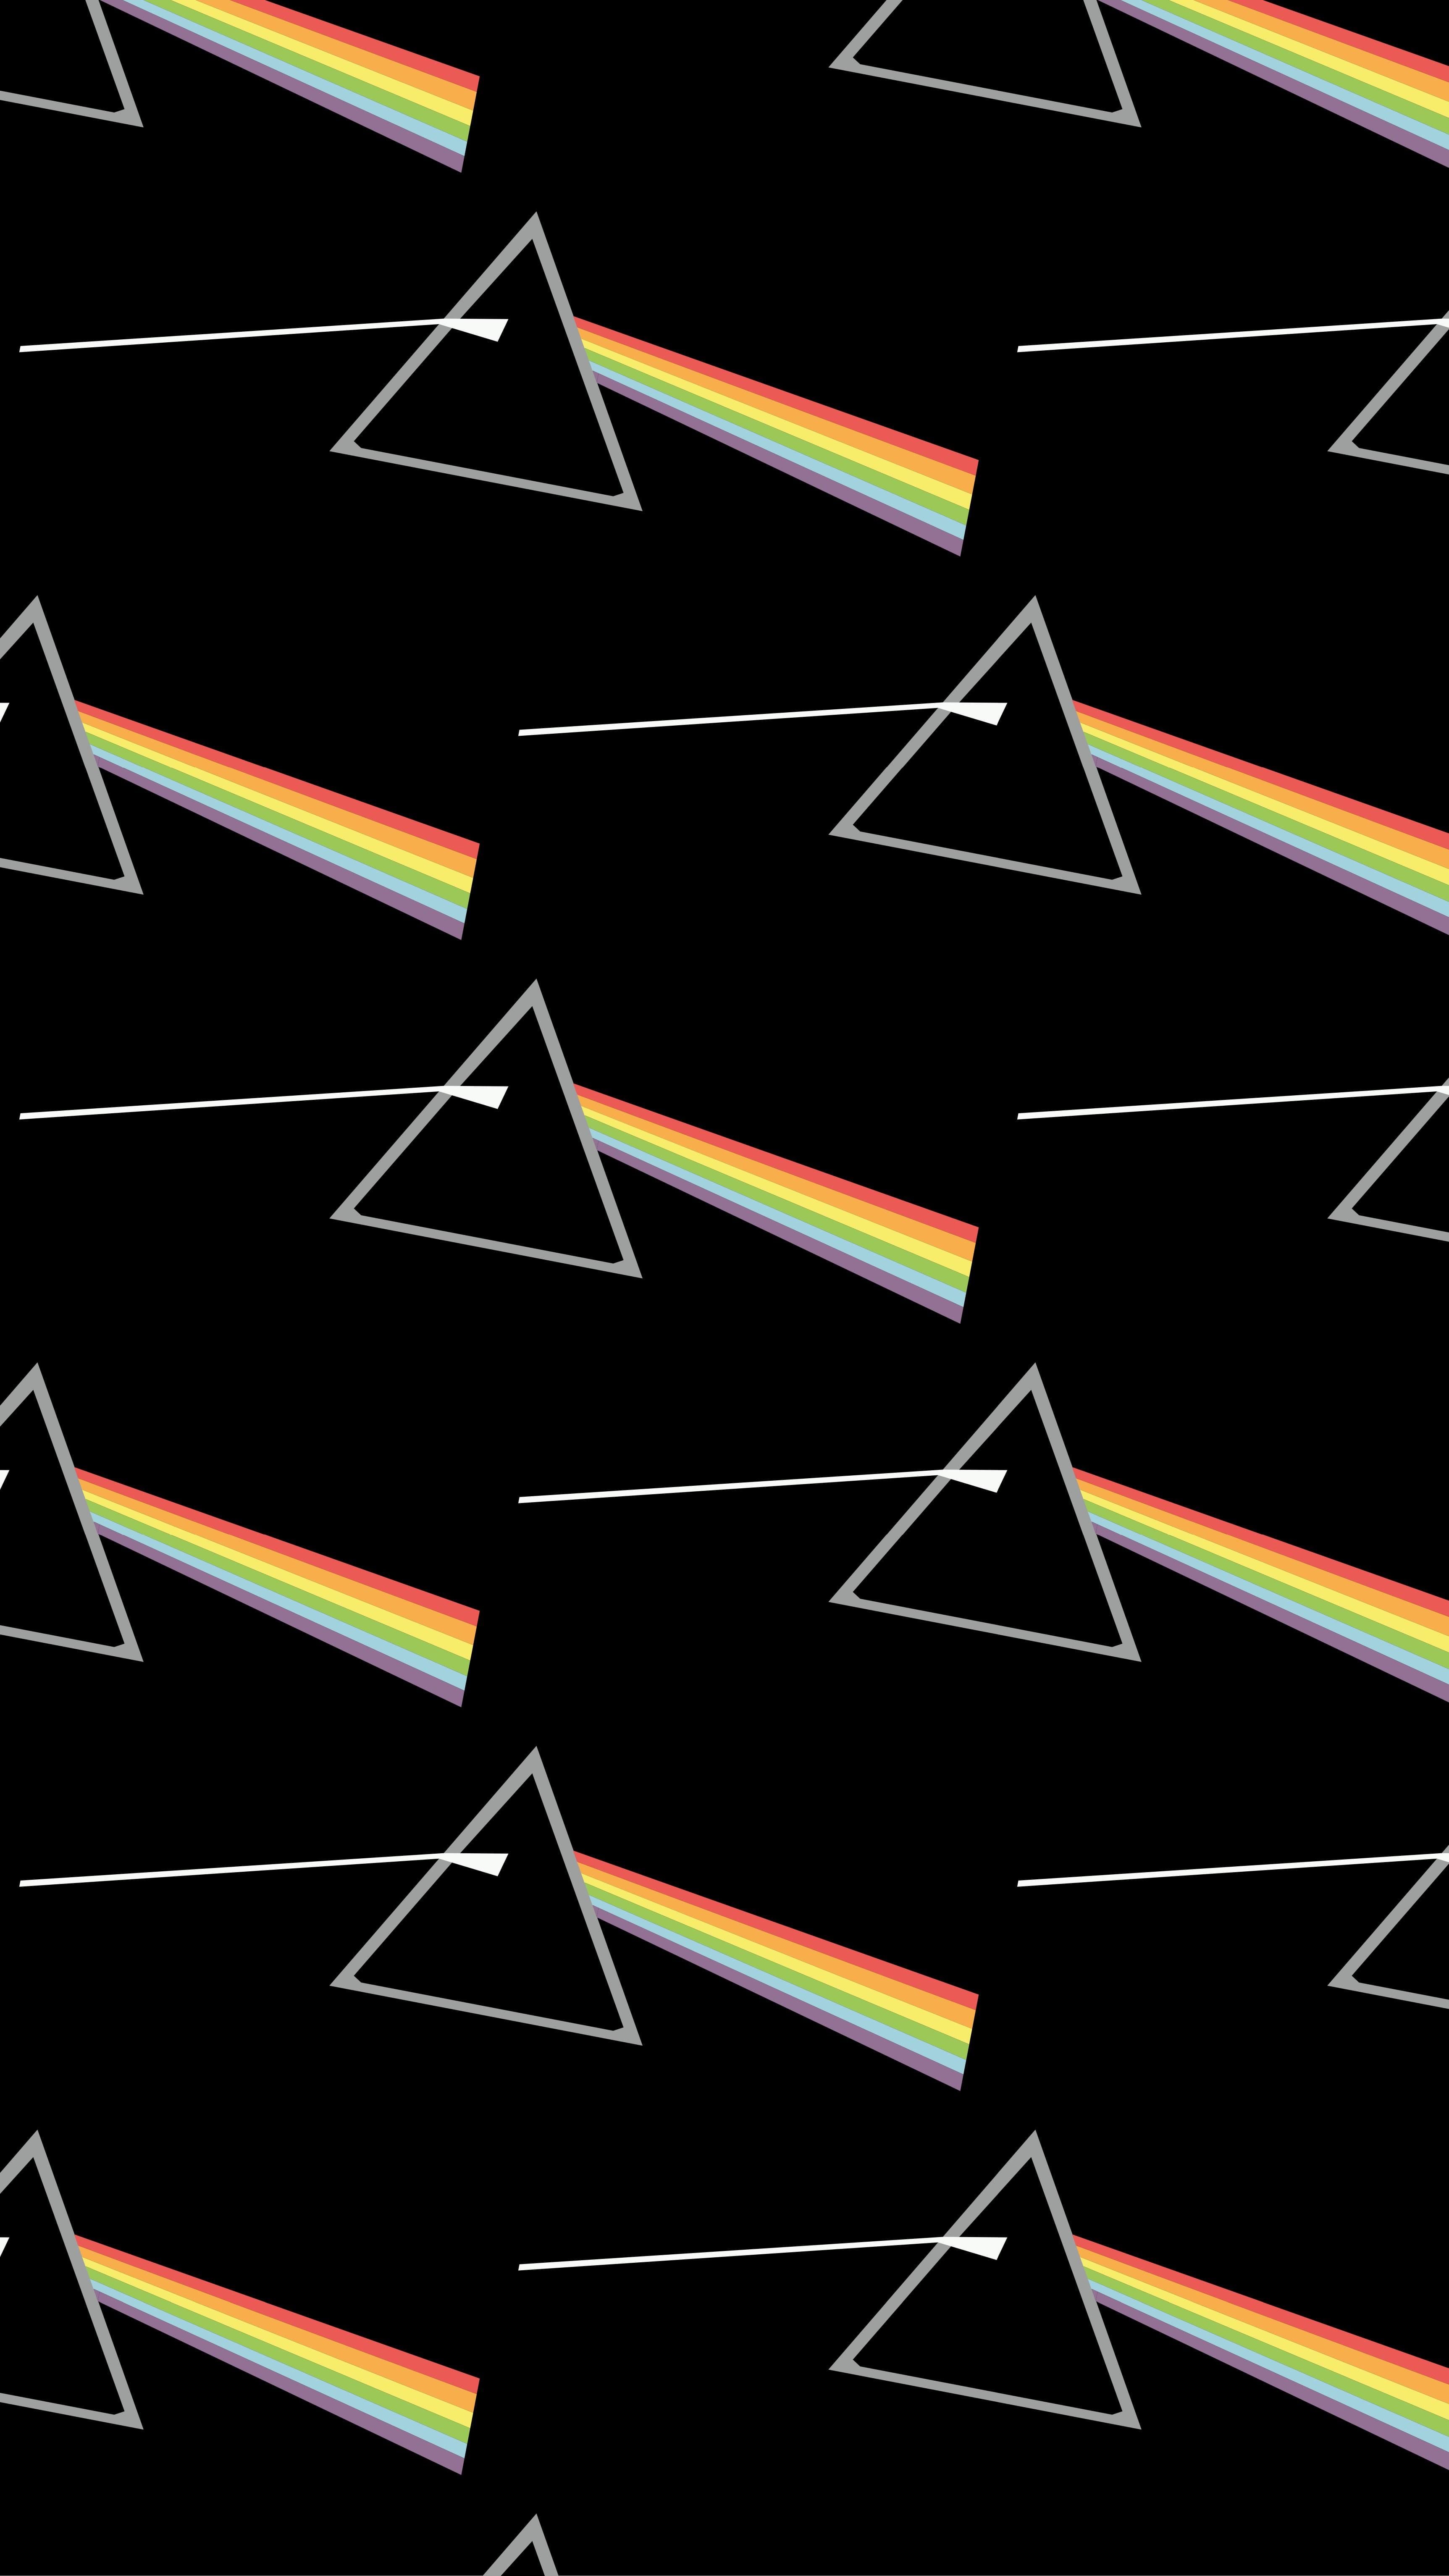 Heres A Pink Floyd Wallpaper For Mobile Devices - Pink Floyd Mobile , HD Wallpaper & Backgrounds